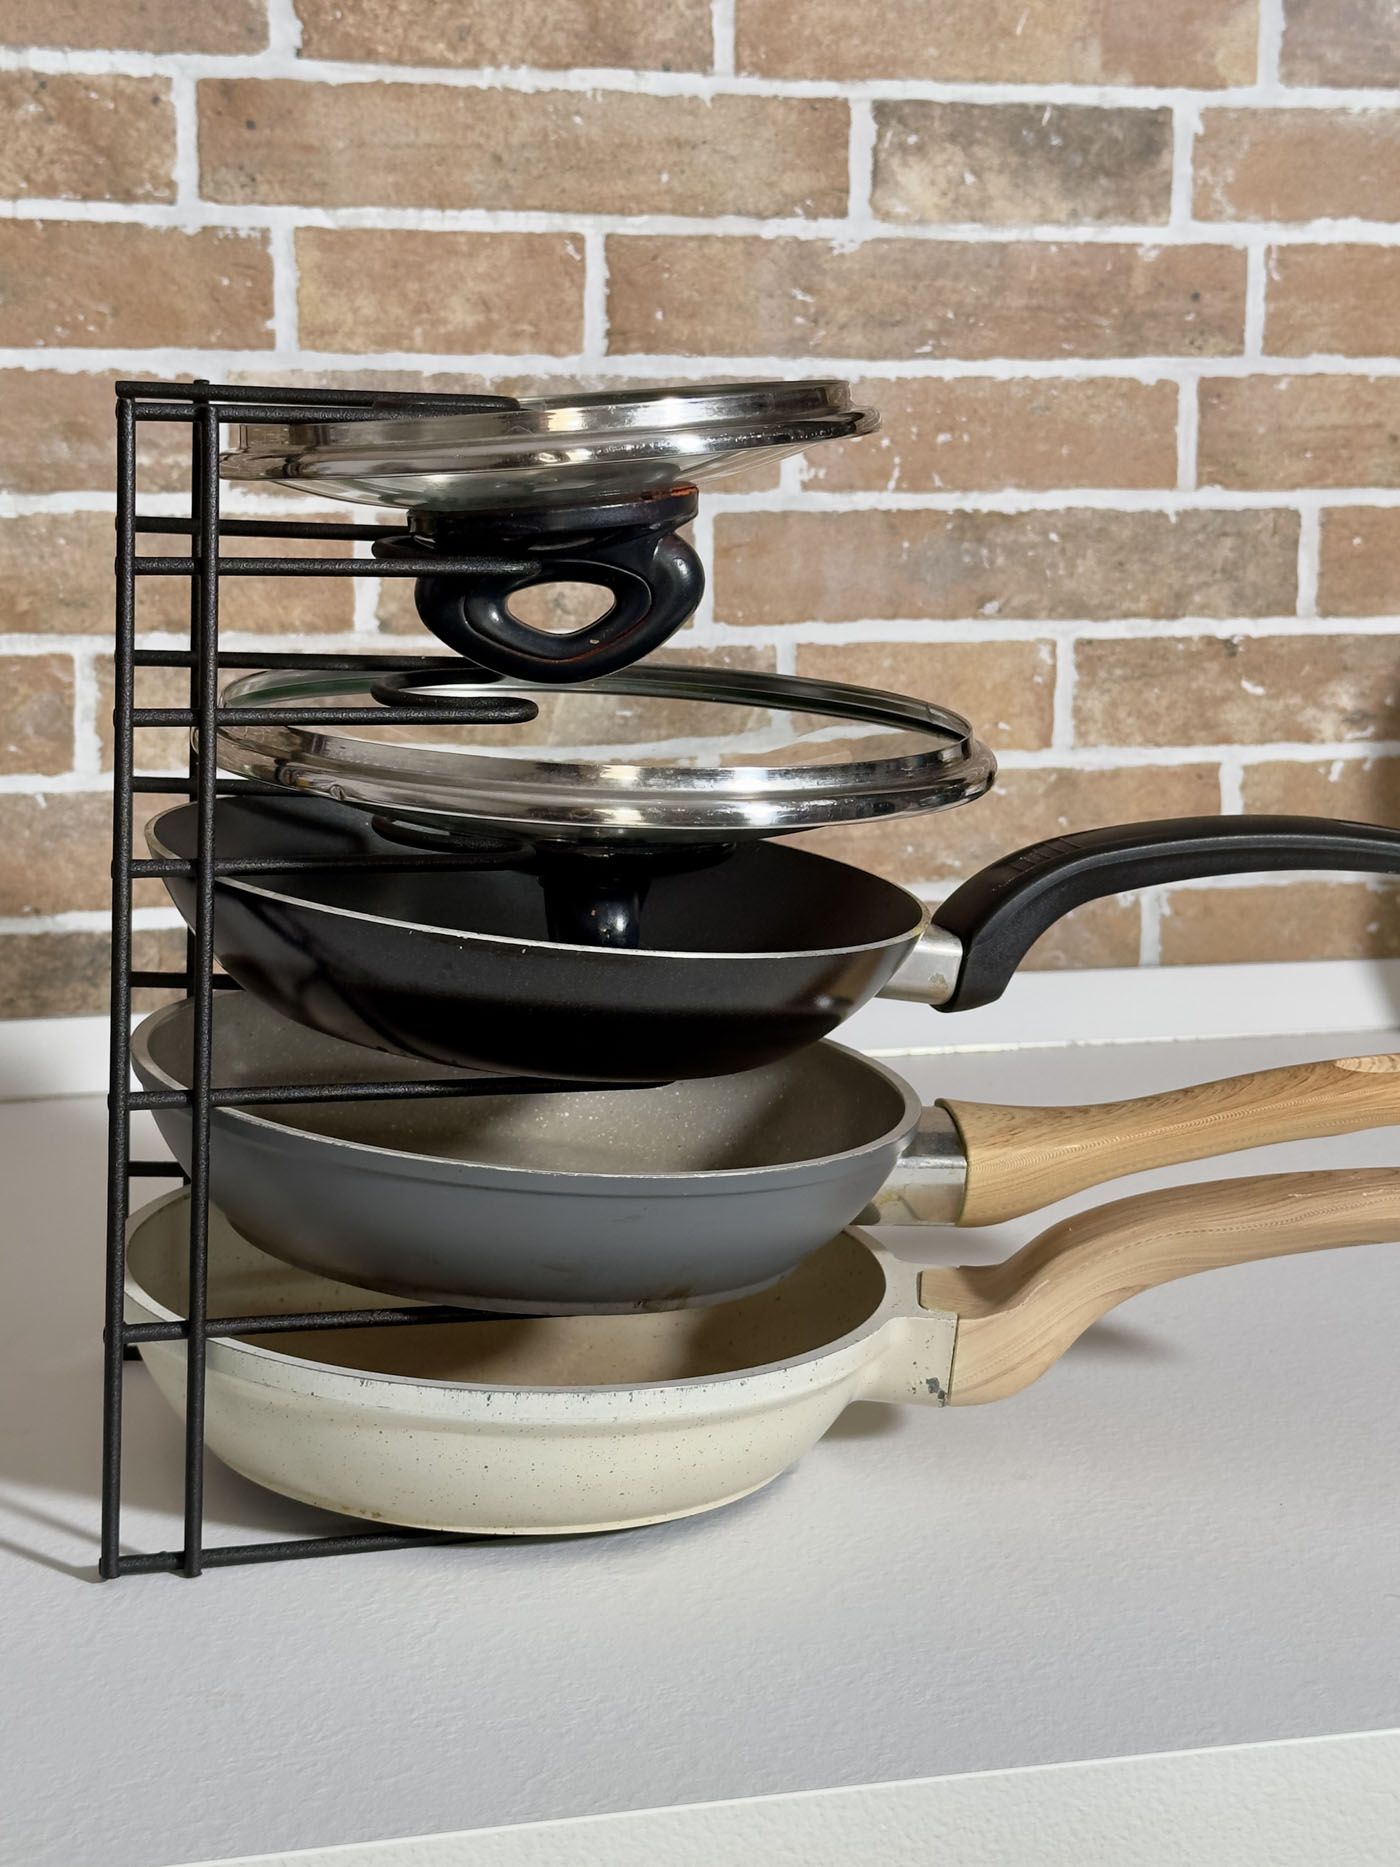 Use A Divider To Stack Pans And Lids